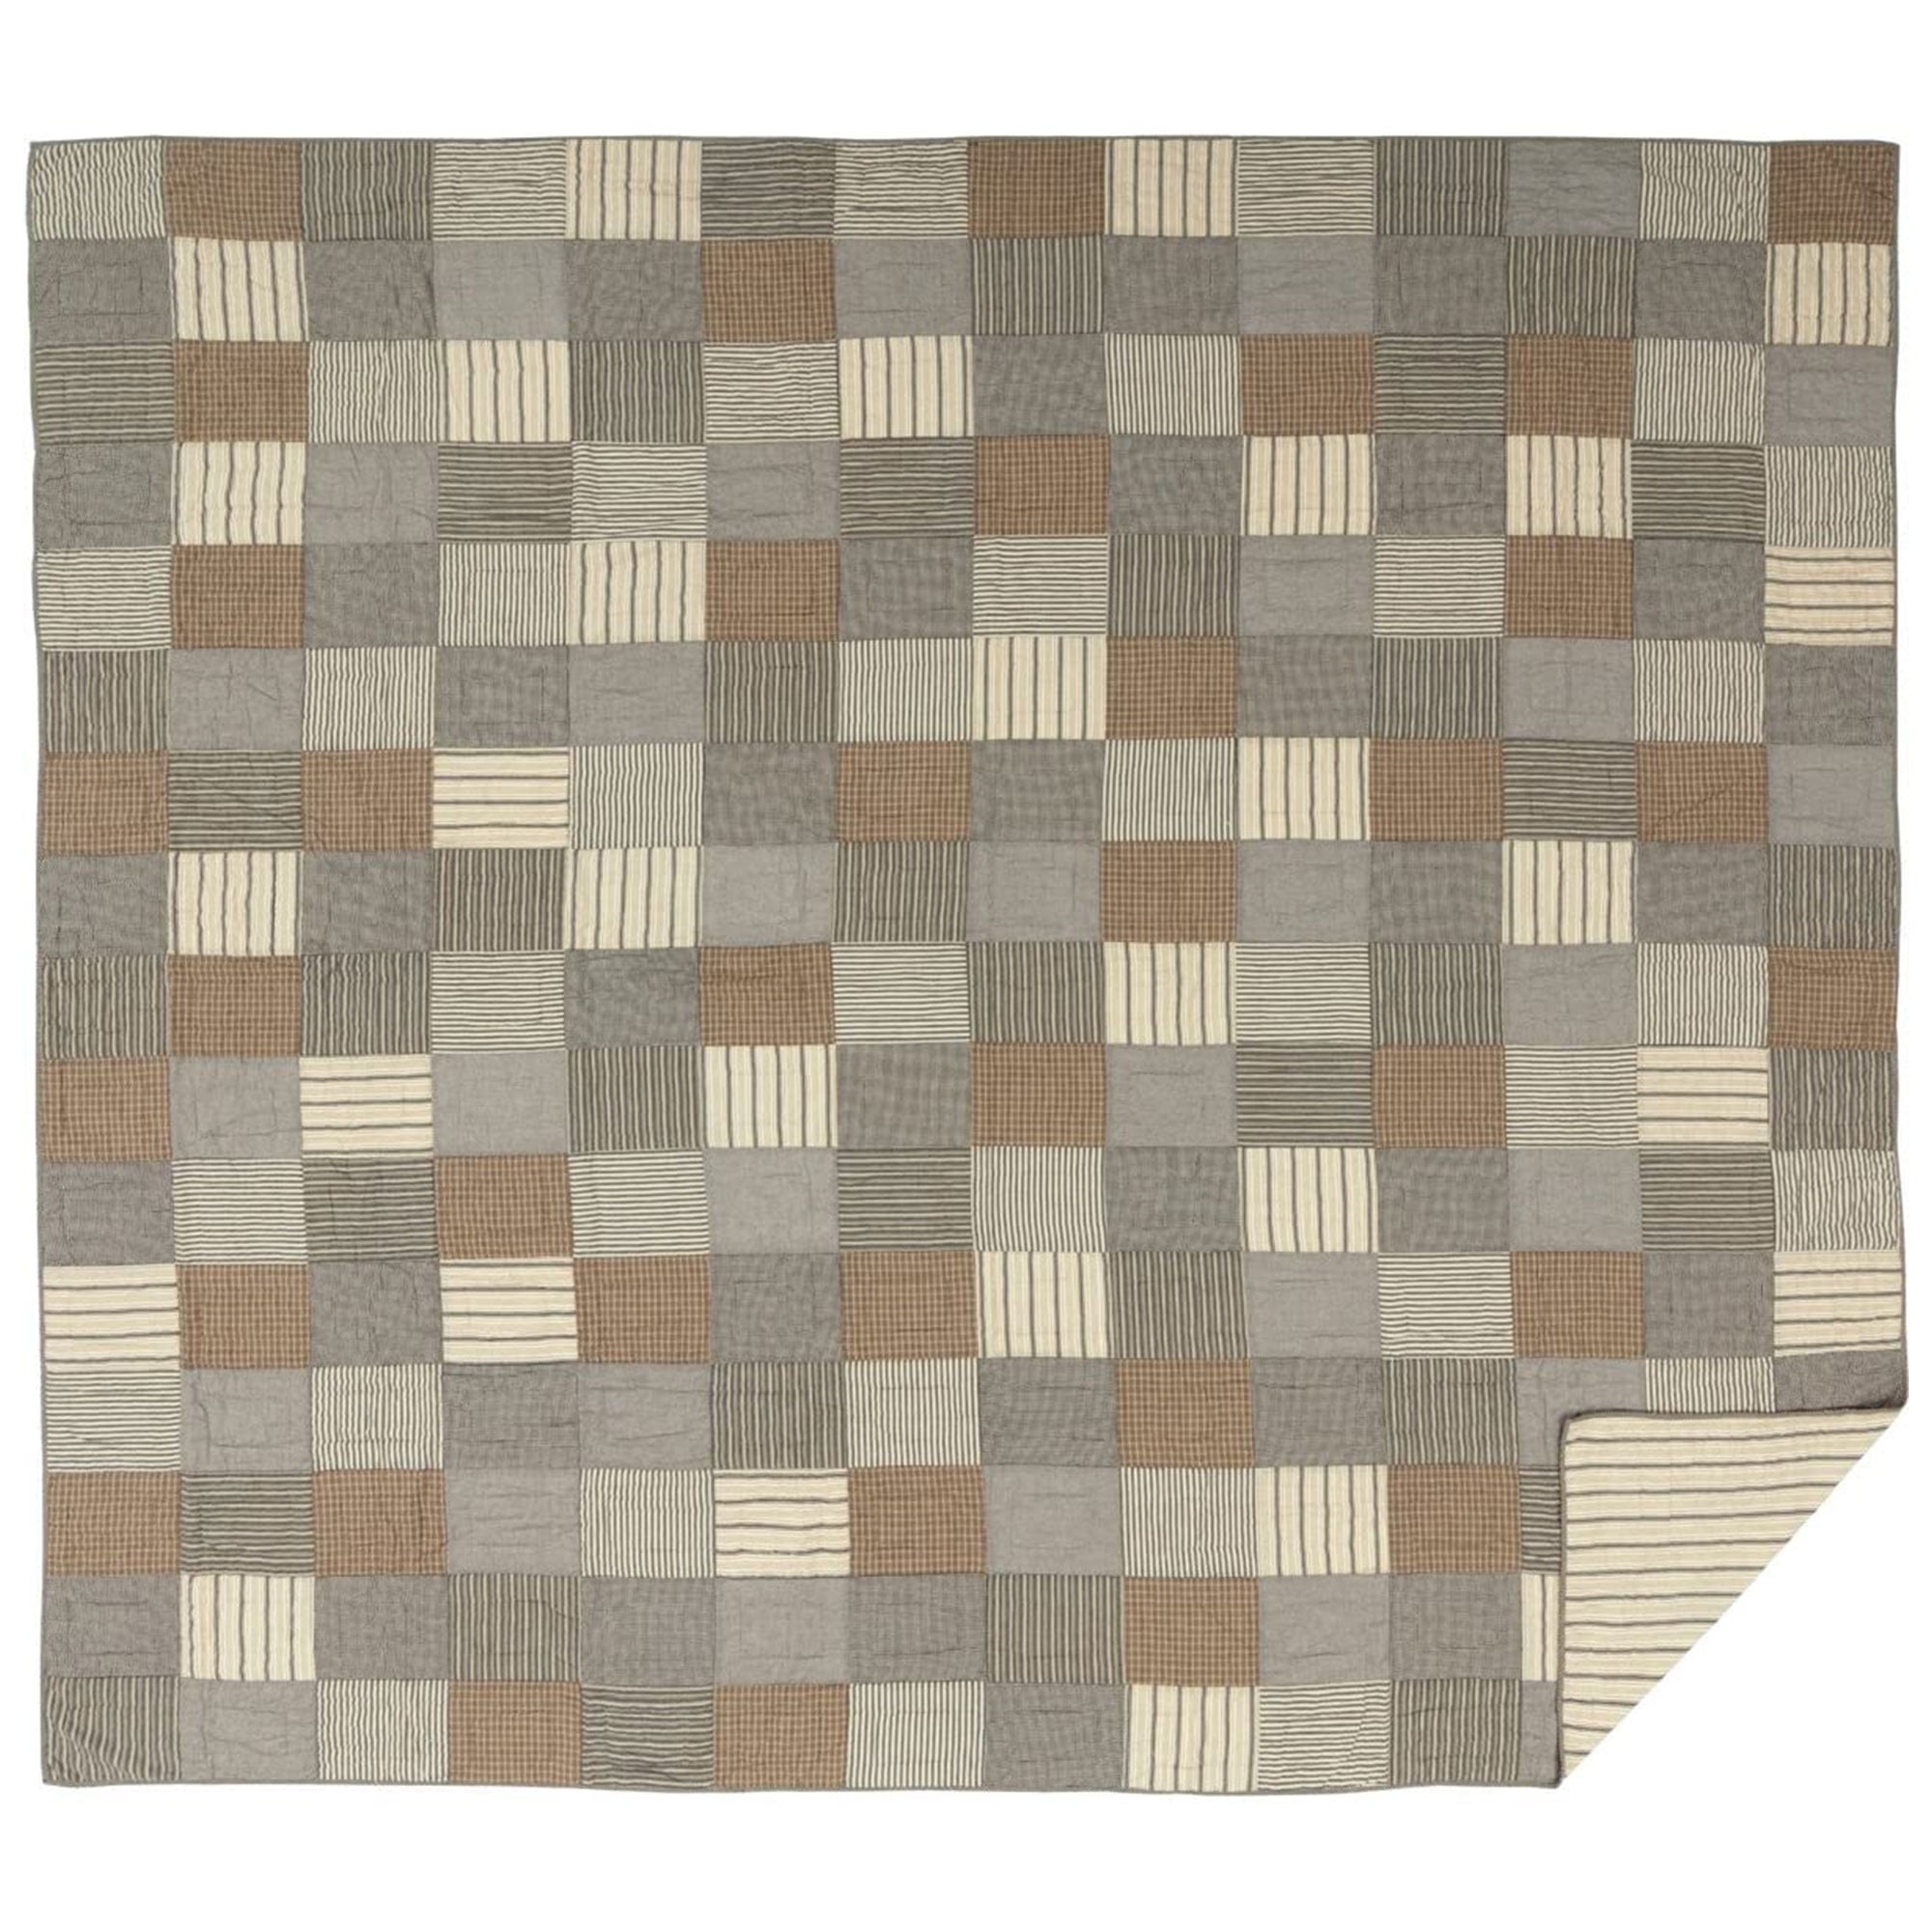 Cal King Quilt Handtitched Country Block Patchwork Earth Tone Gray Sawyer Mill